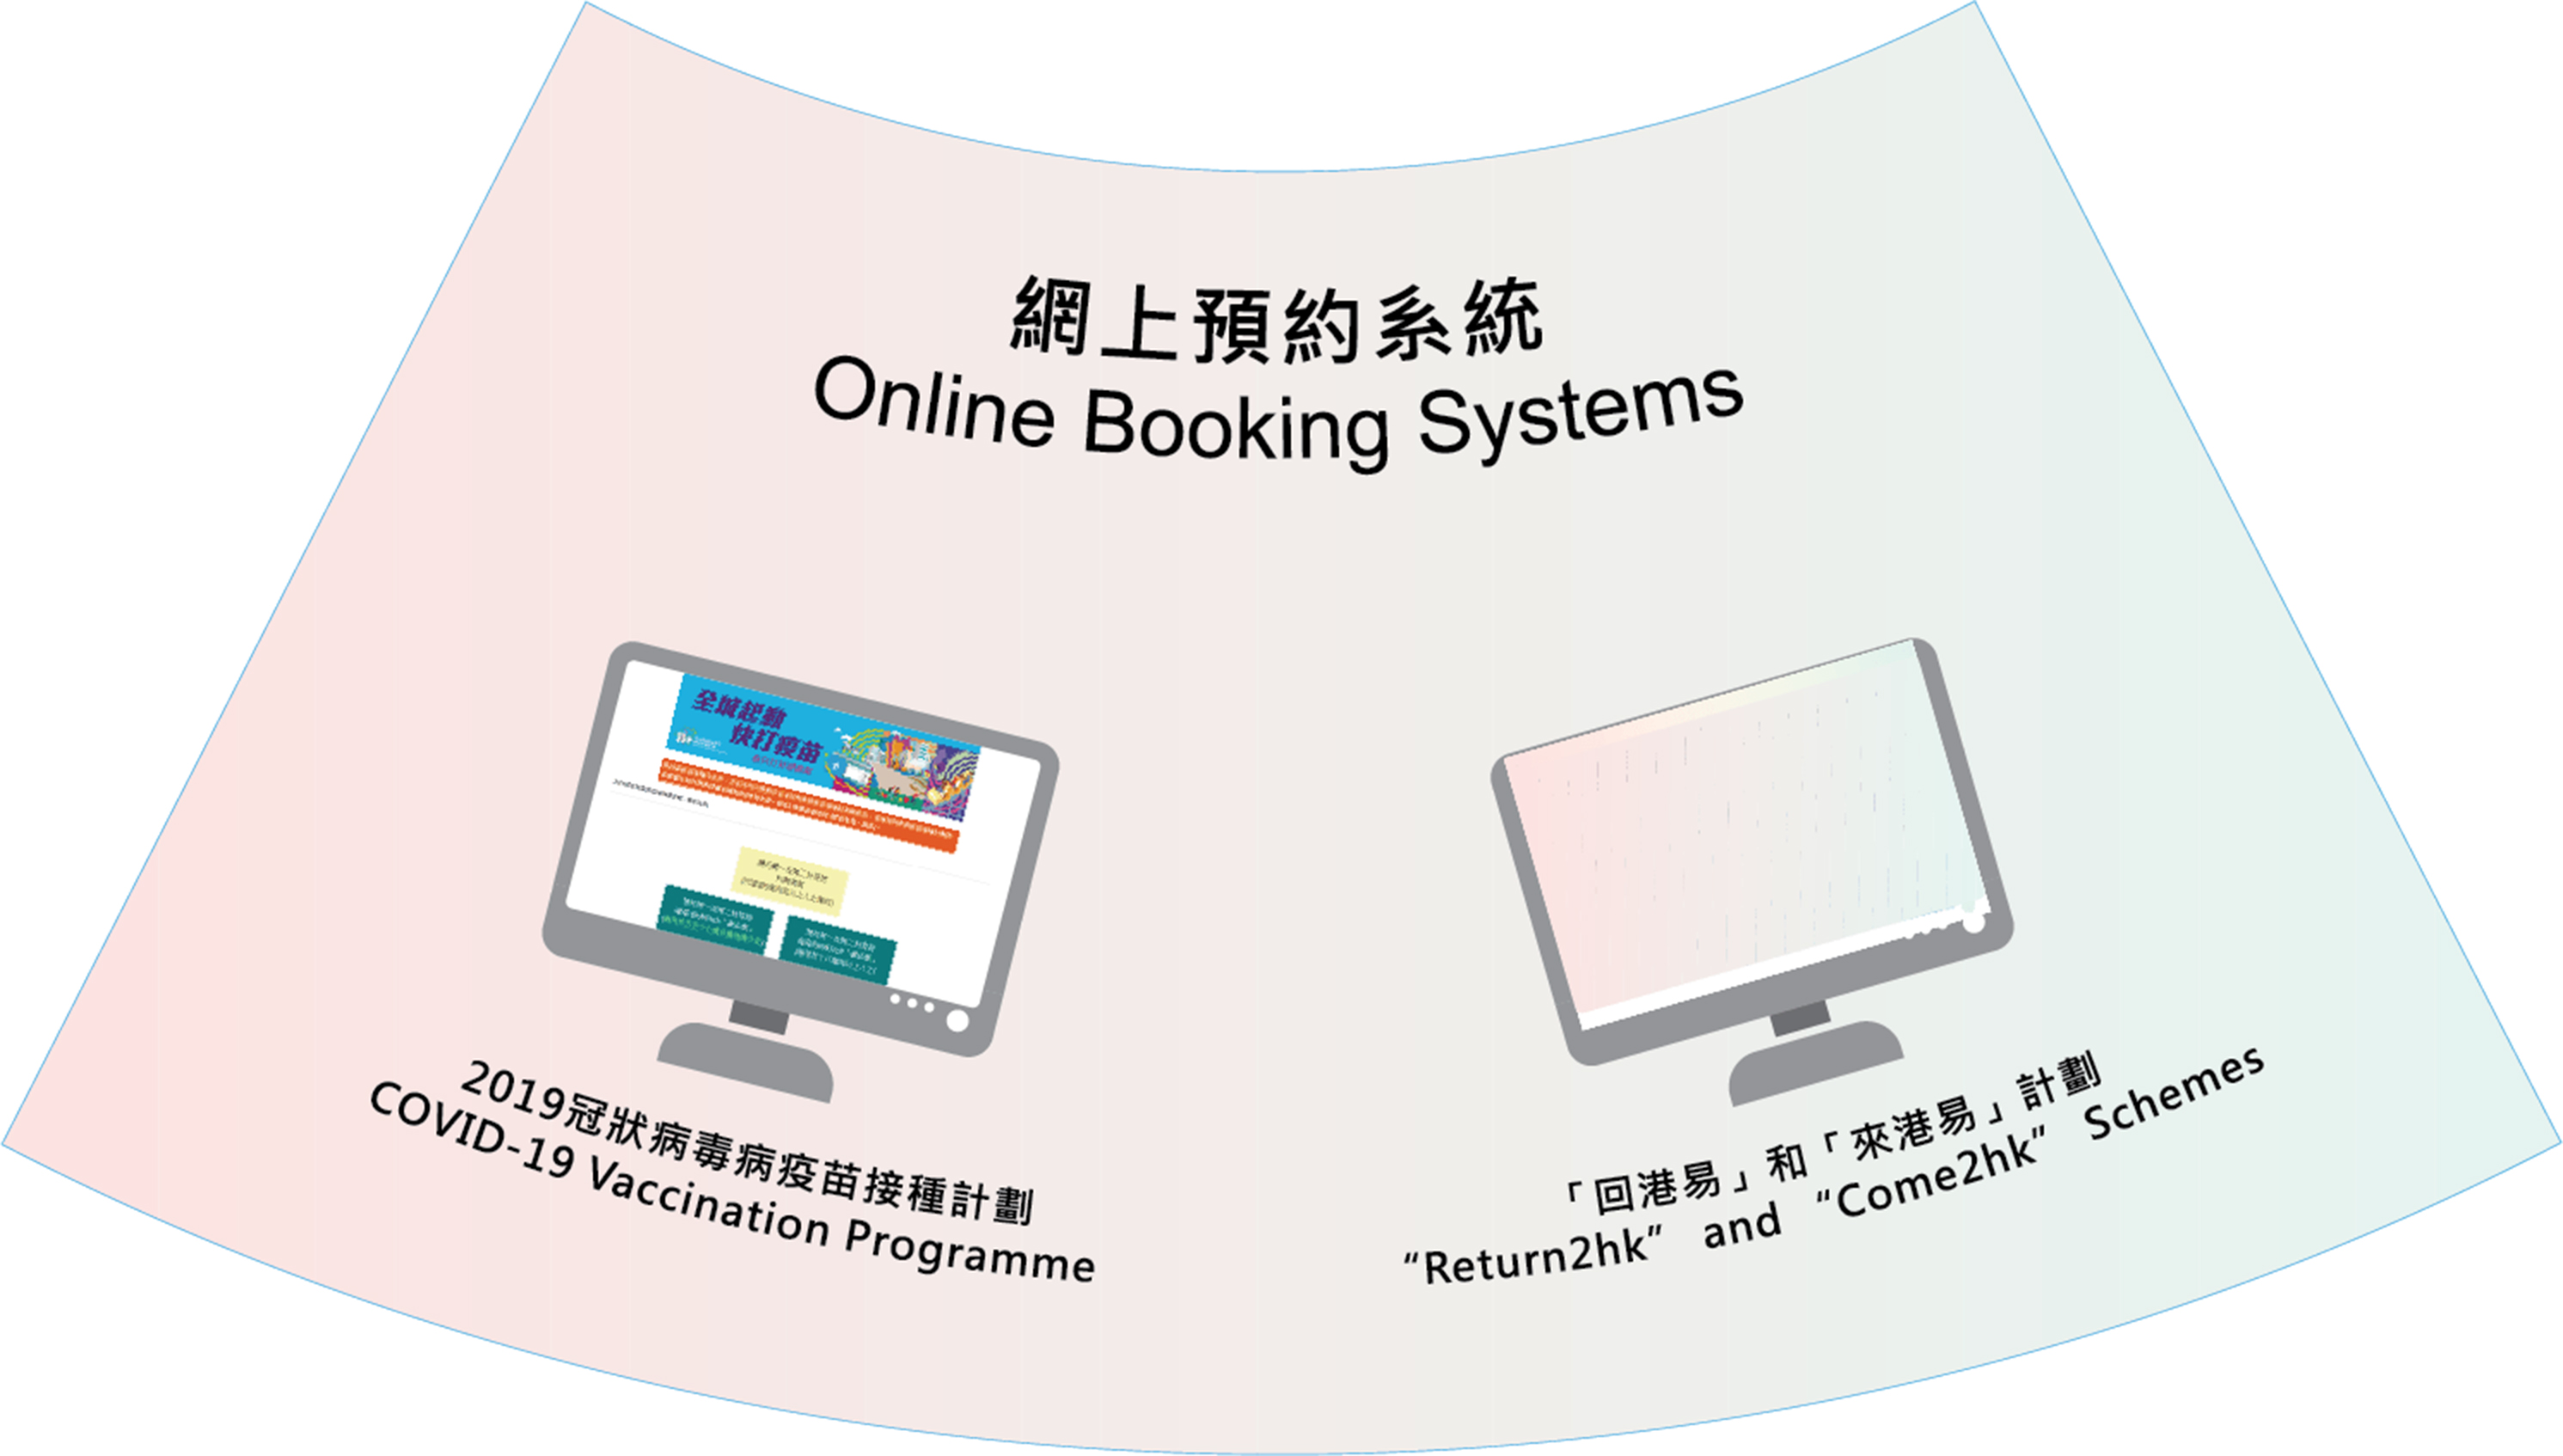 Online Booking System – COVID-19 Vaccination Programme; “Return2hk” and “Come2hk” Schemes